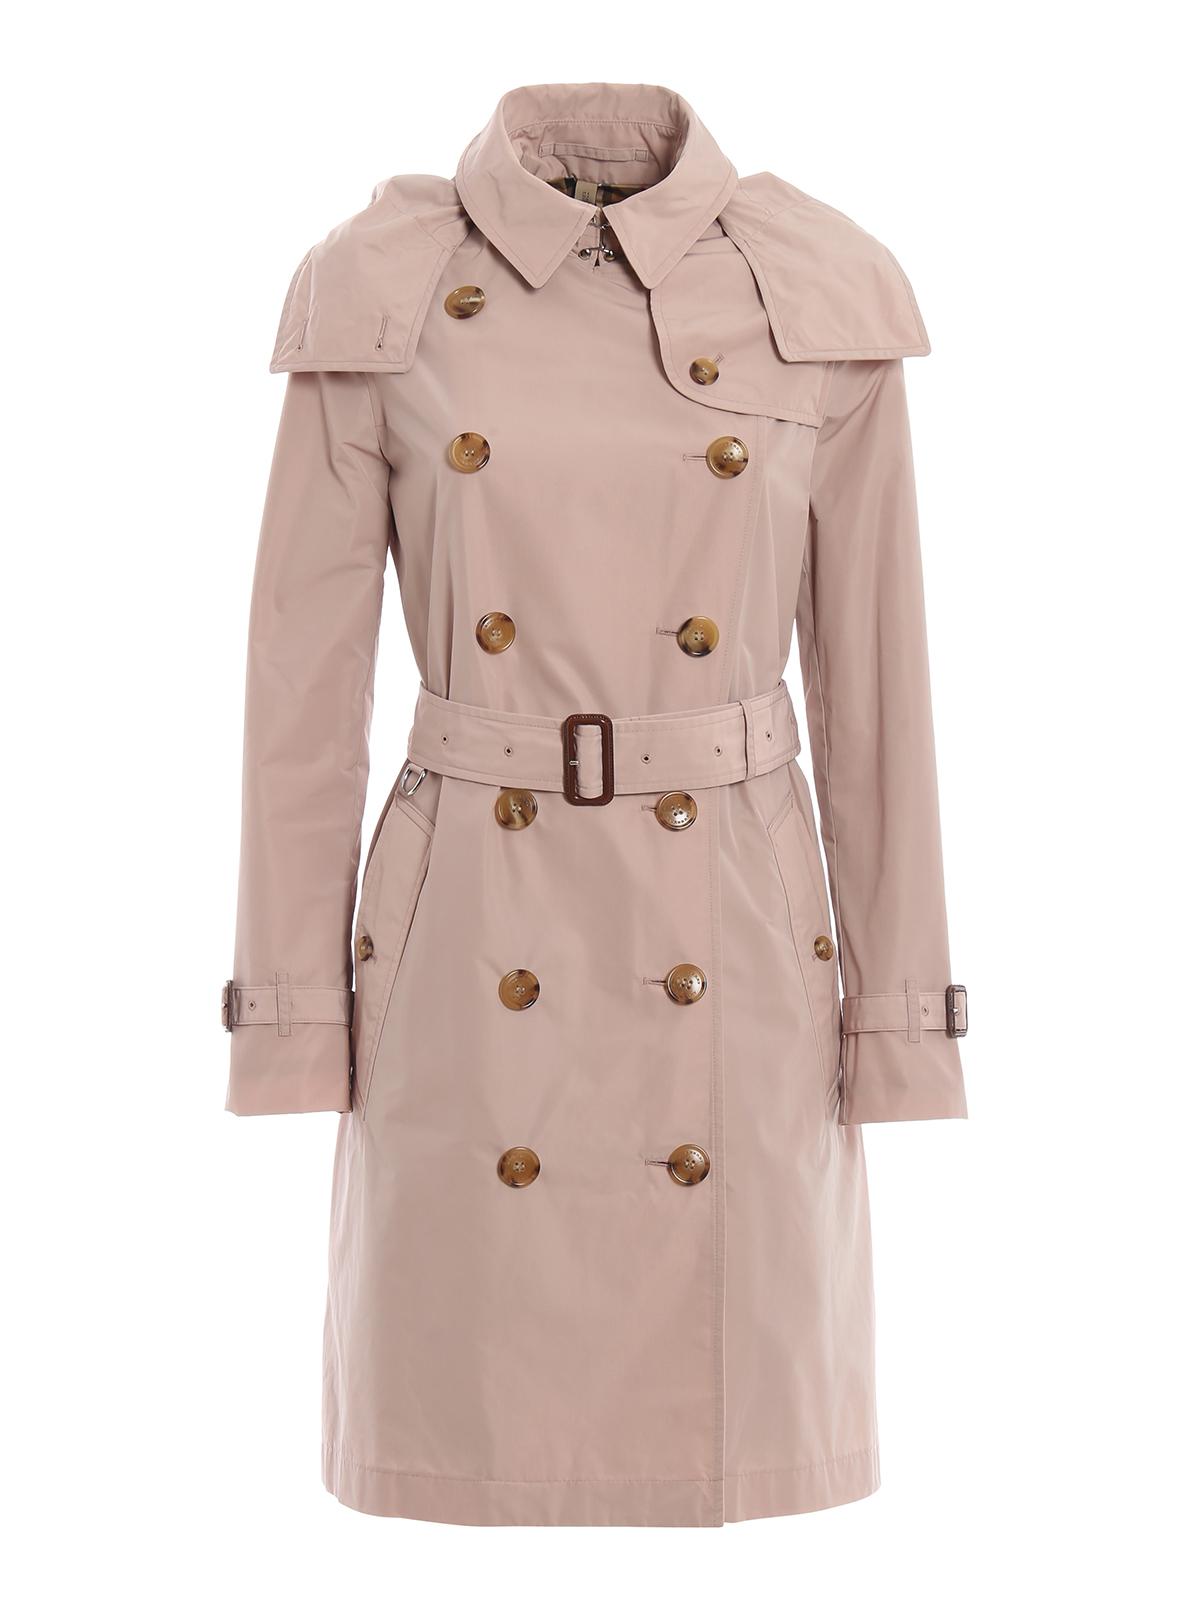 Burberry Leather Kensington Taffeta Trench Coat in Light Pink (Pink) - Lyst